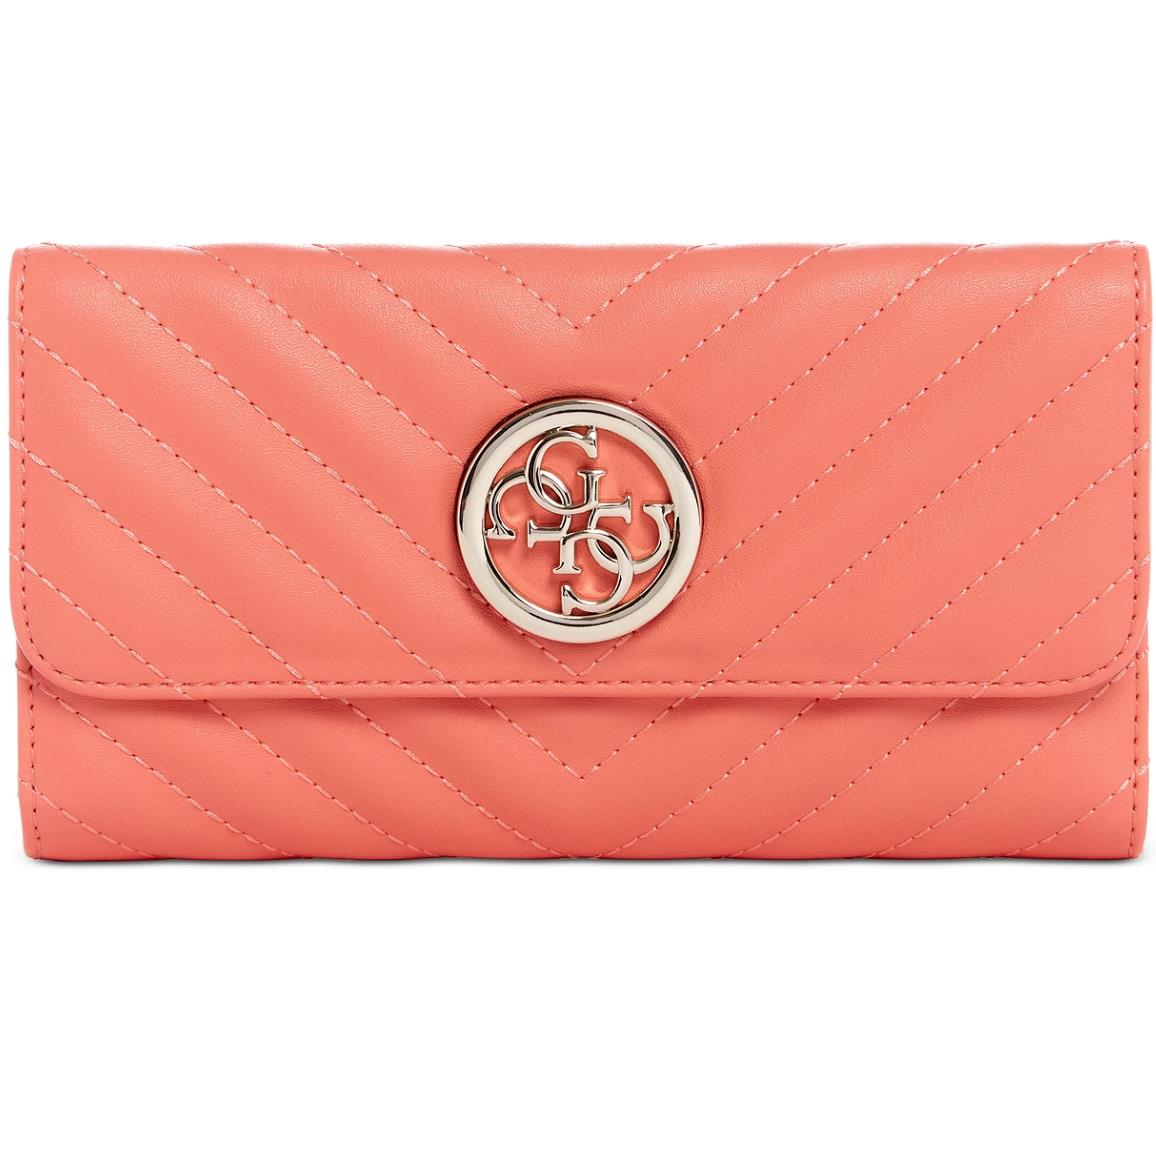 Guess L79828 Womens Coral Blakely Clutch Wallet